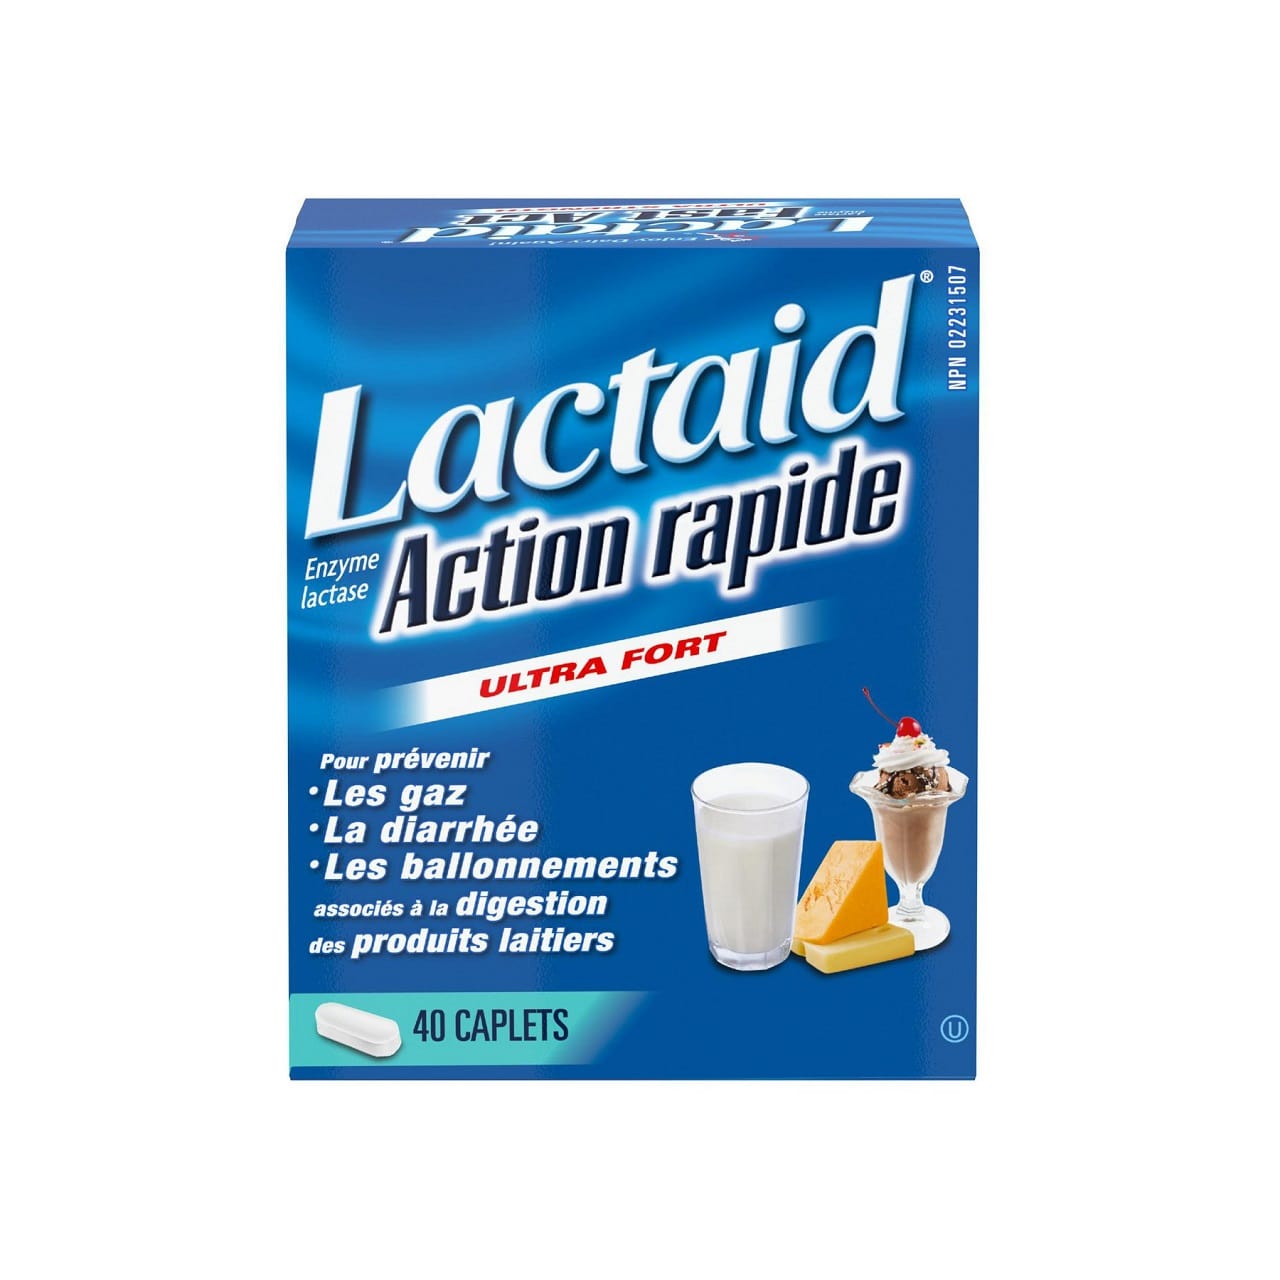 Product label for Lactaid Ultra Strength Fast Act Lactase Enzyme Caplets (40 caplets) in French